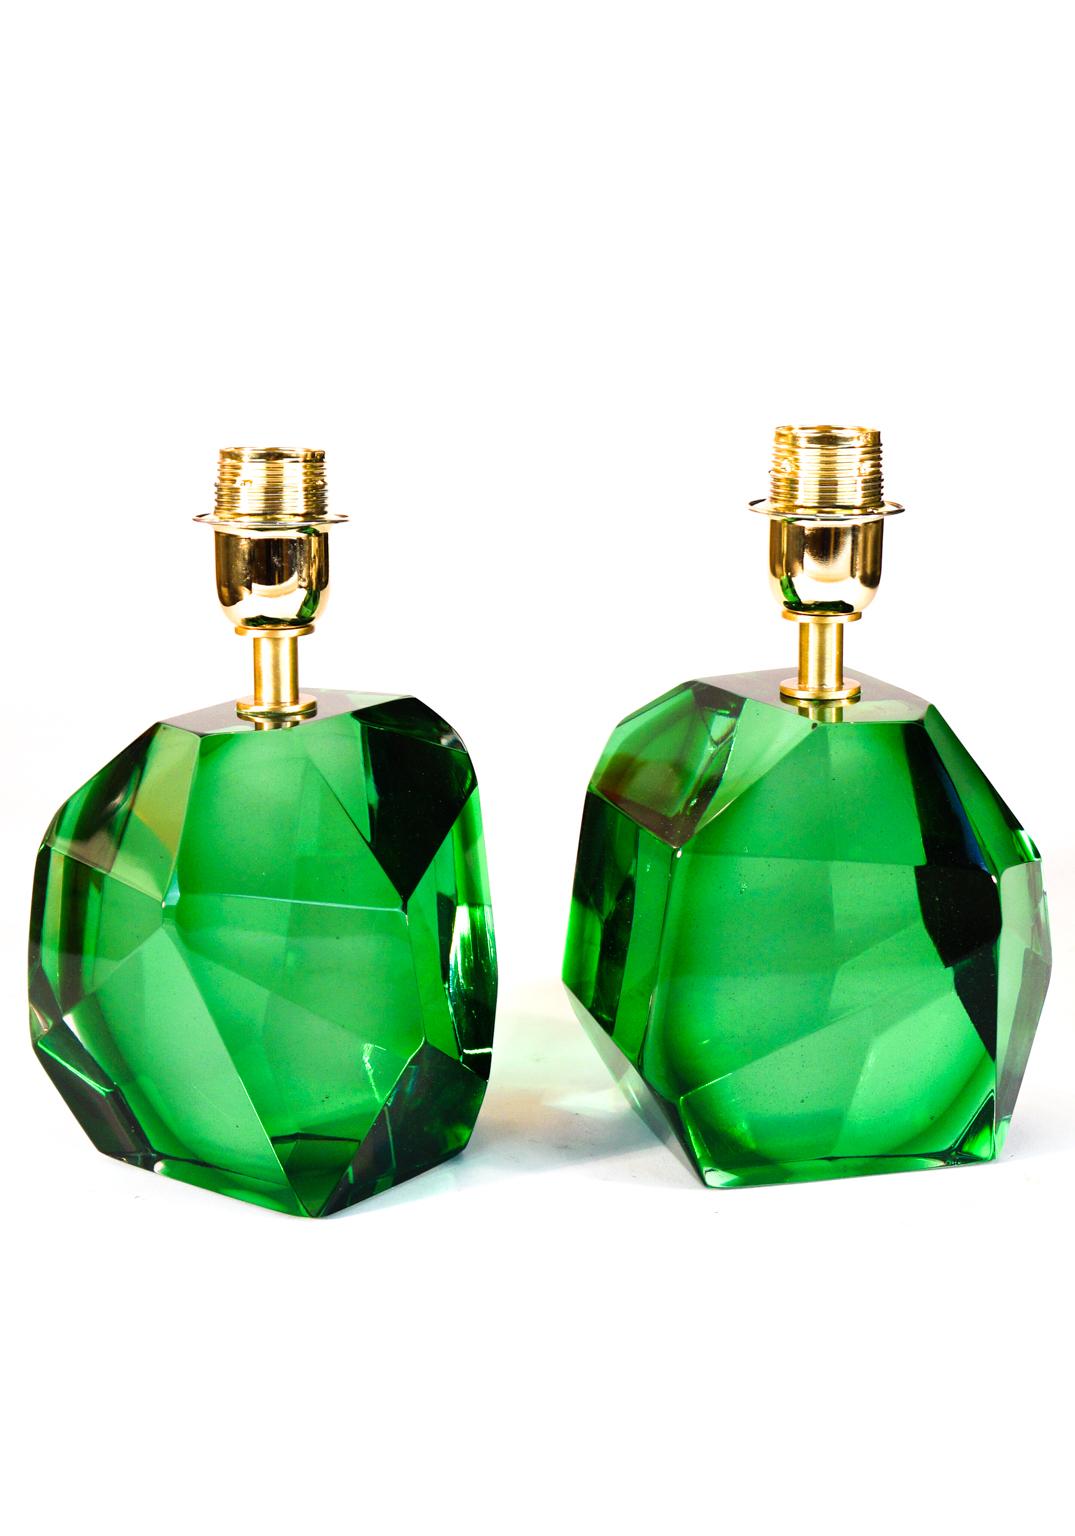 Toso Mid-Century Pair of Green Italian Murano Glass Table Lamps Faceted, 1994s For Sale 9